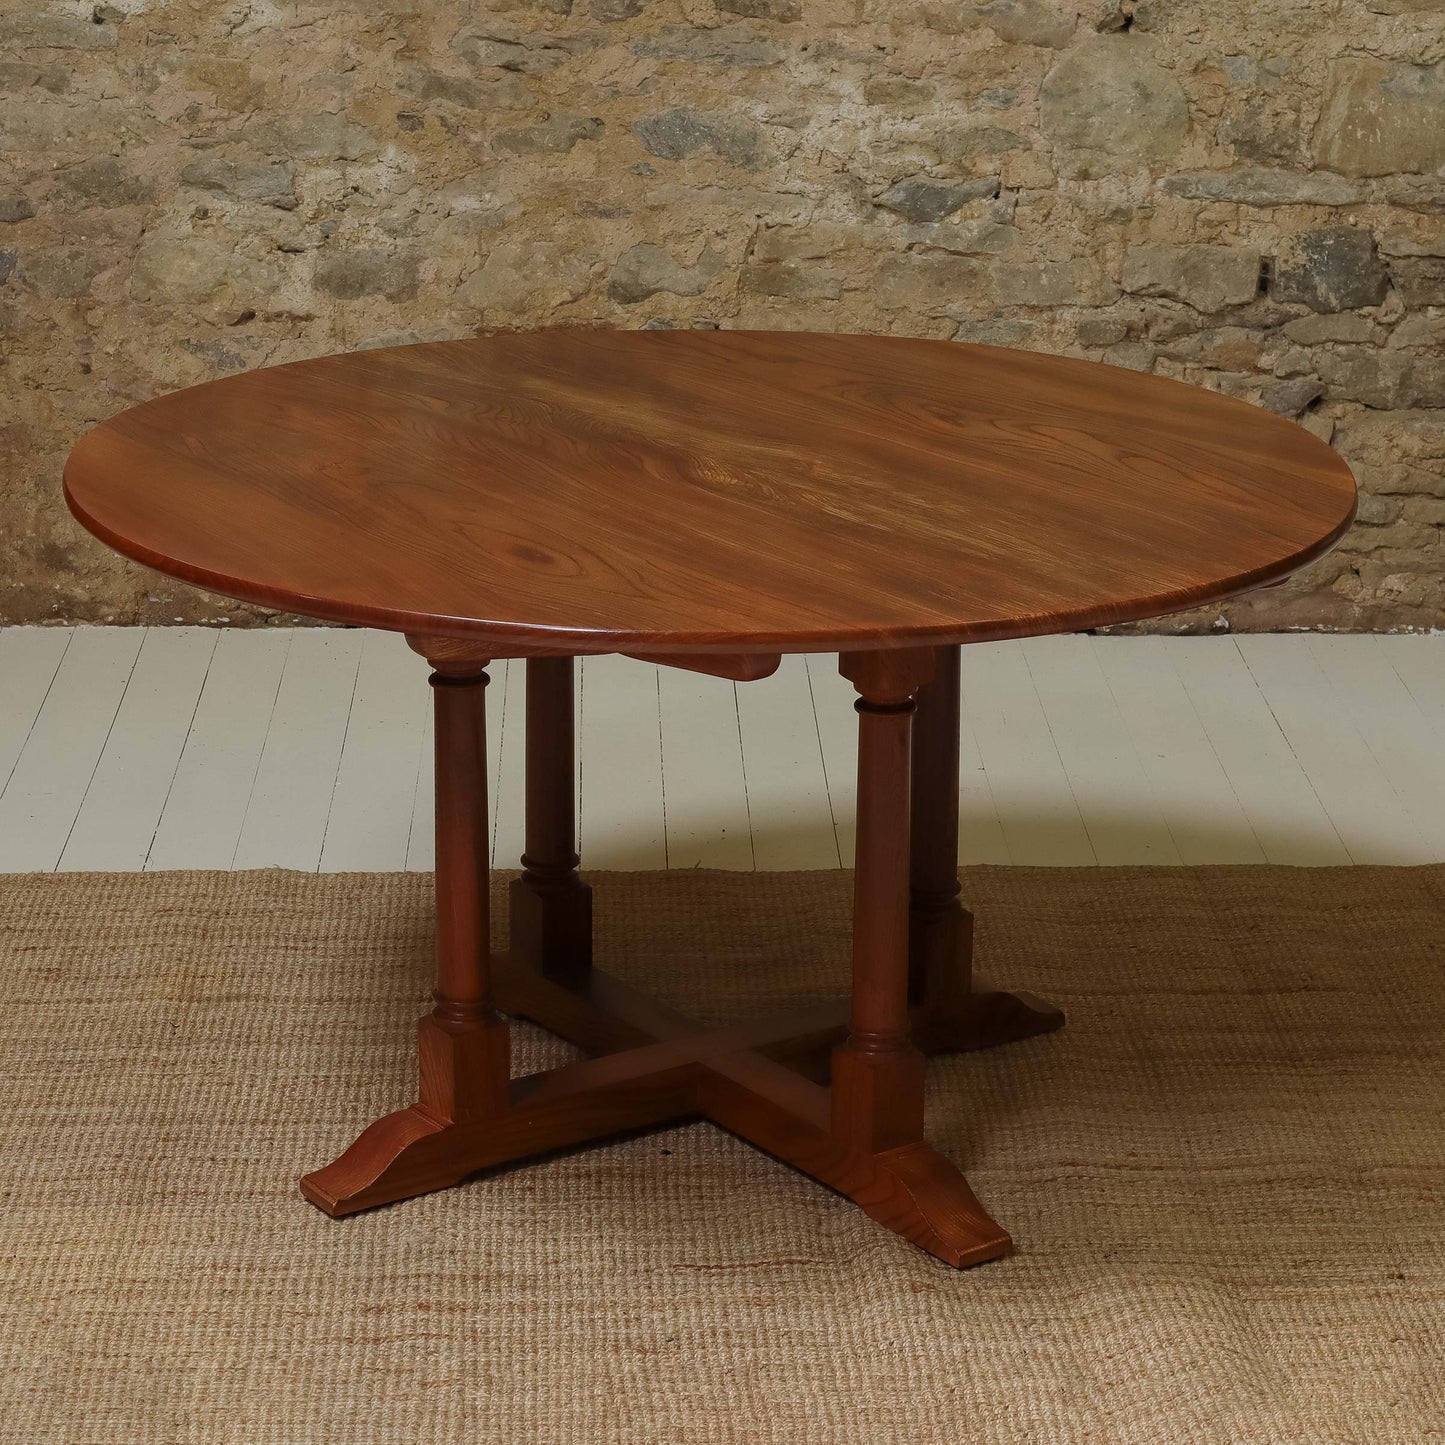 Peter Hall of Staveley Arts & Crafts Lakes School English Willow Dining Table